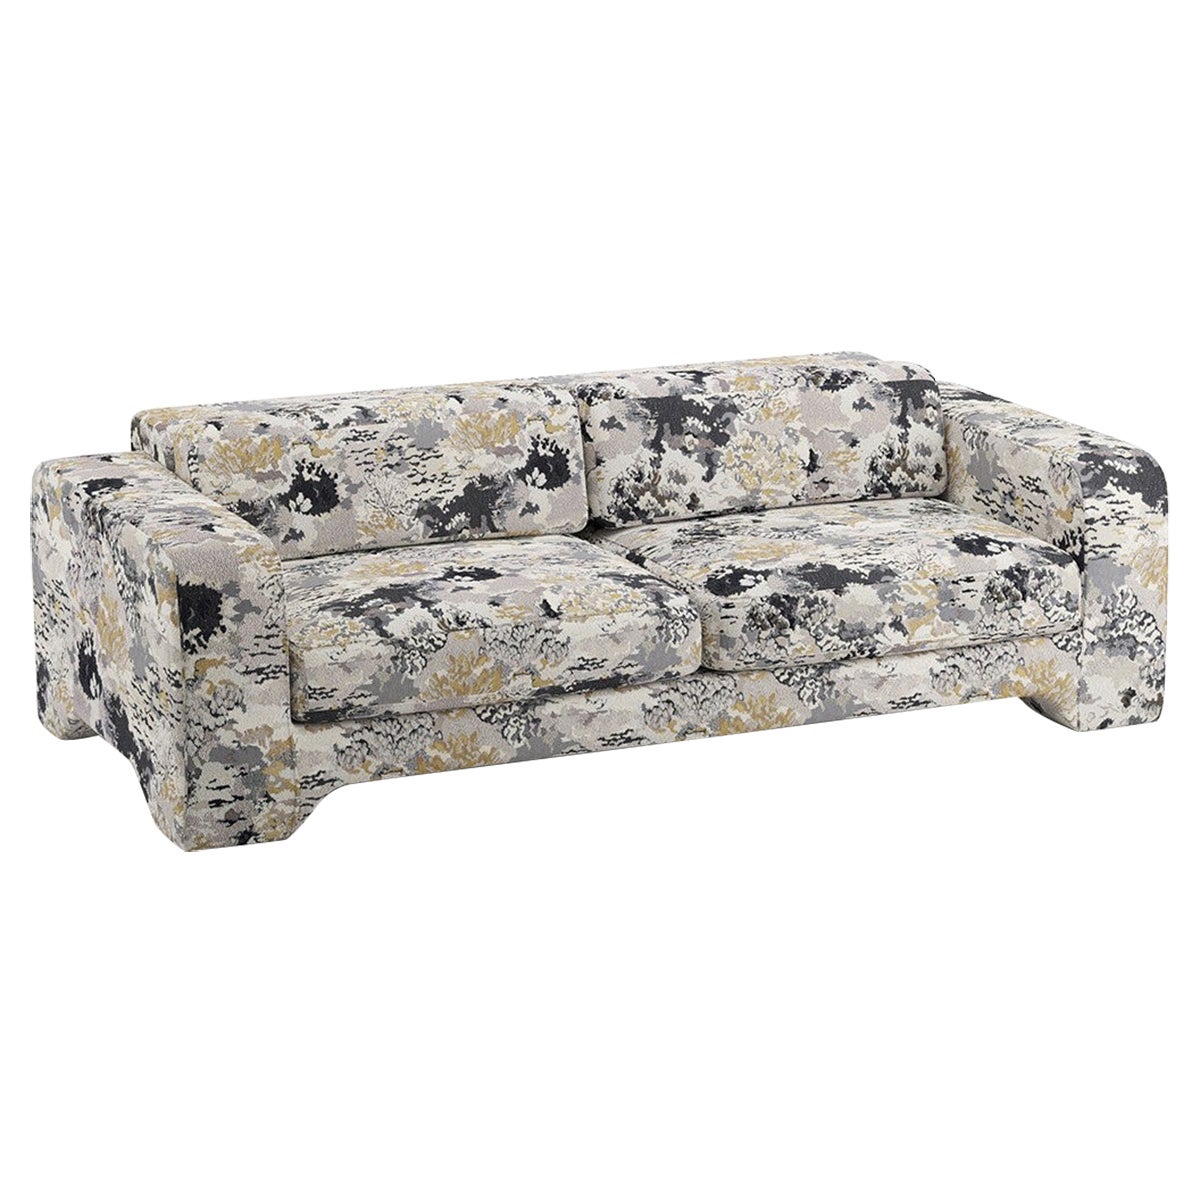 Popus Editions Giovanna 2.5 Seater Sofa in Charcoal Marrakech Jacquard Fabric